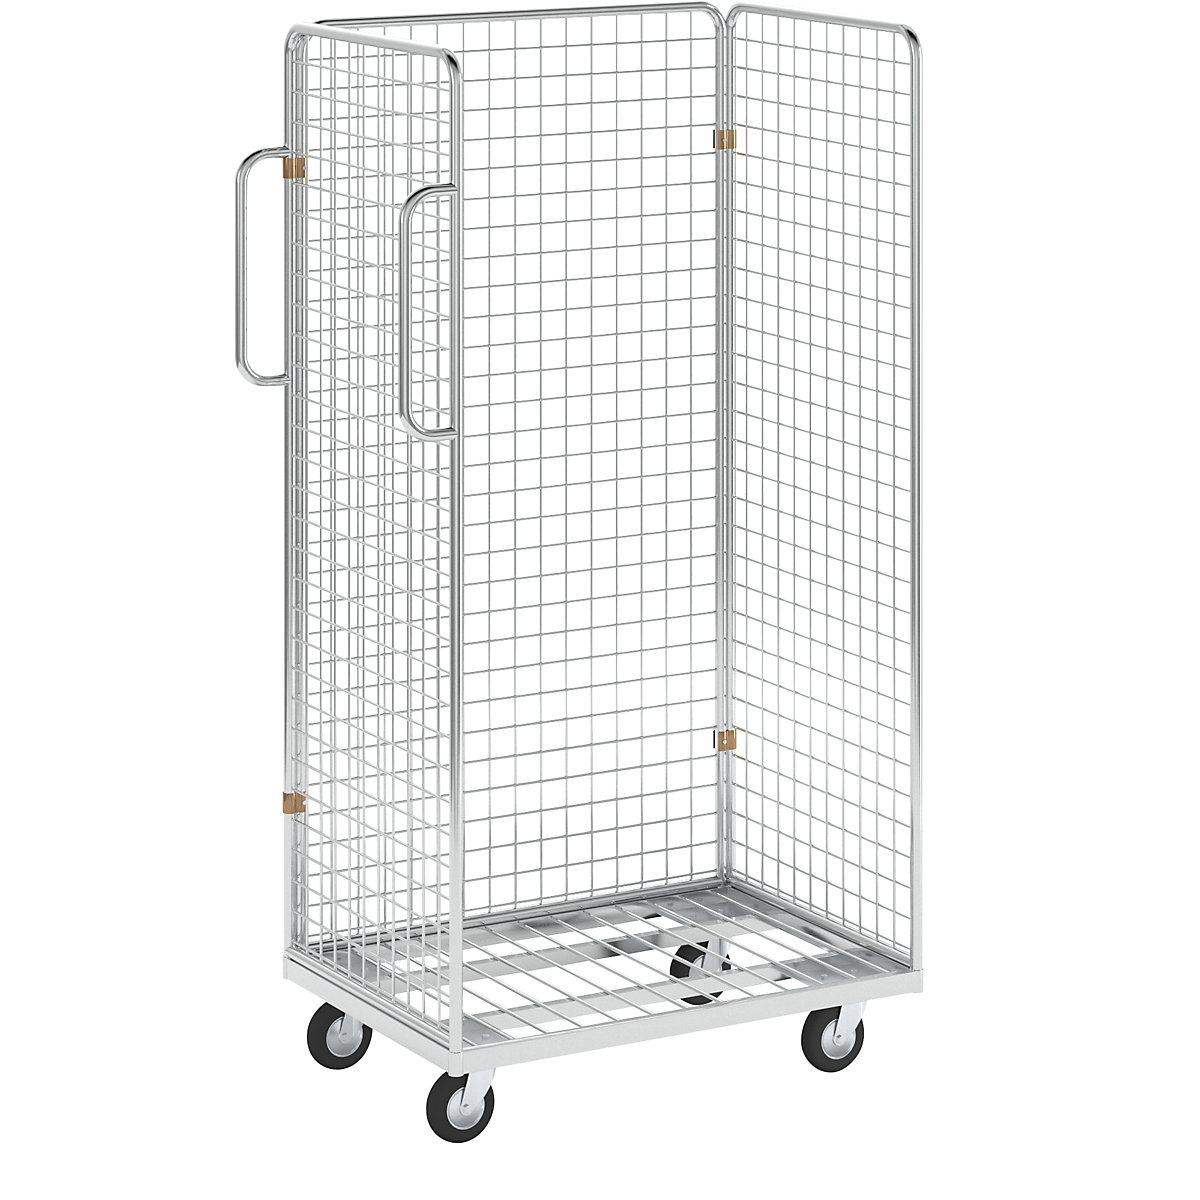 Order picking trolley, overall max. load 300 kg, external dimensions WxDxH 900 x 600 x 1600 mm-9